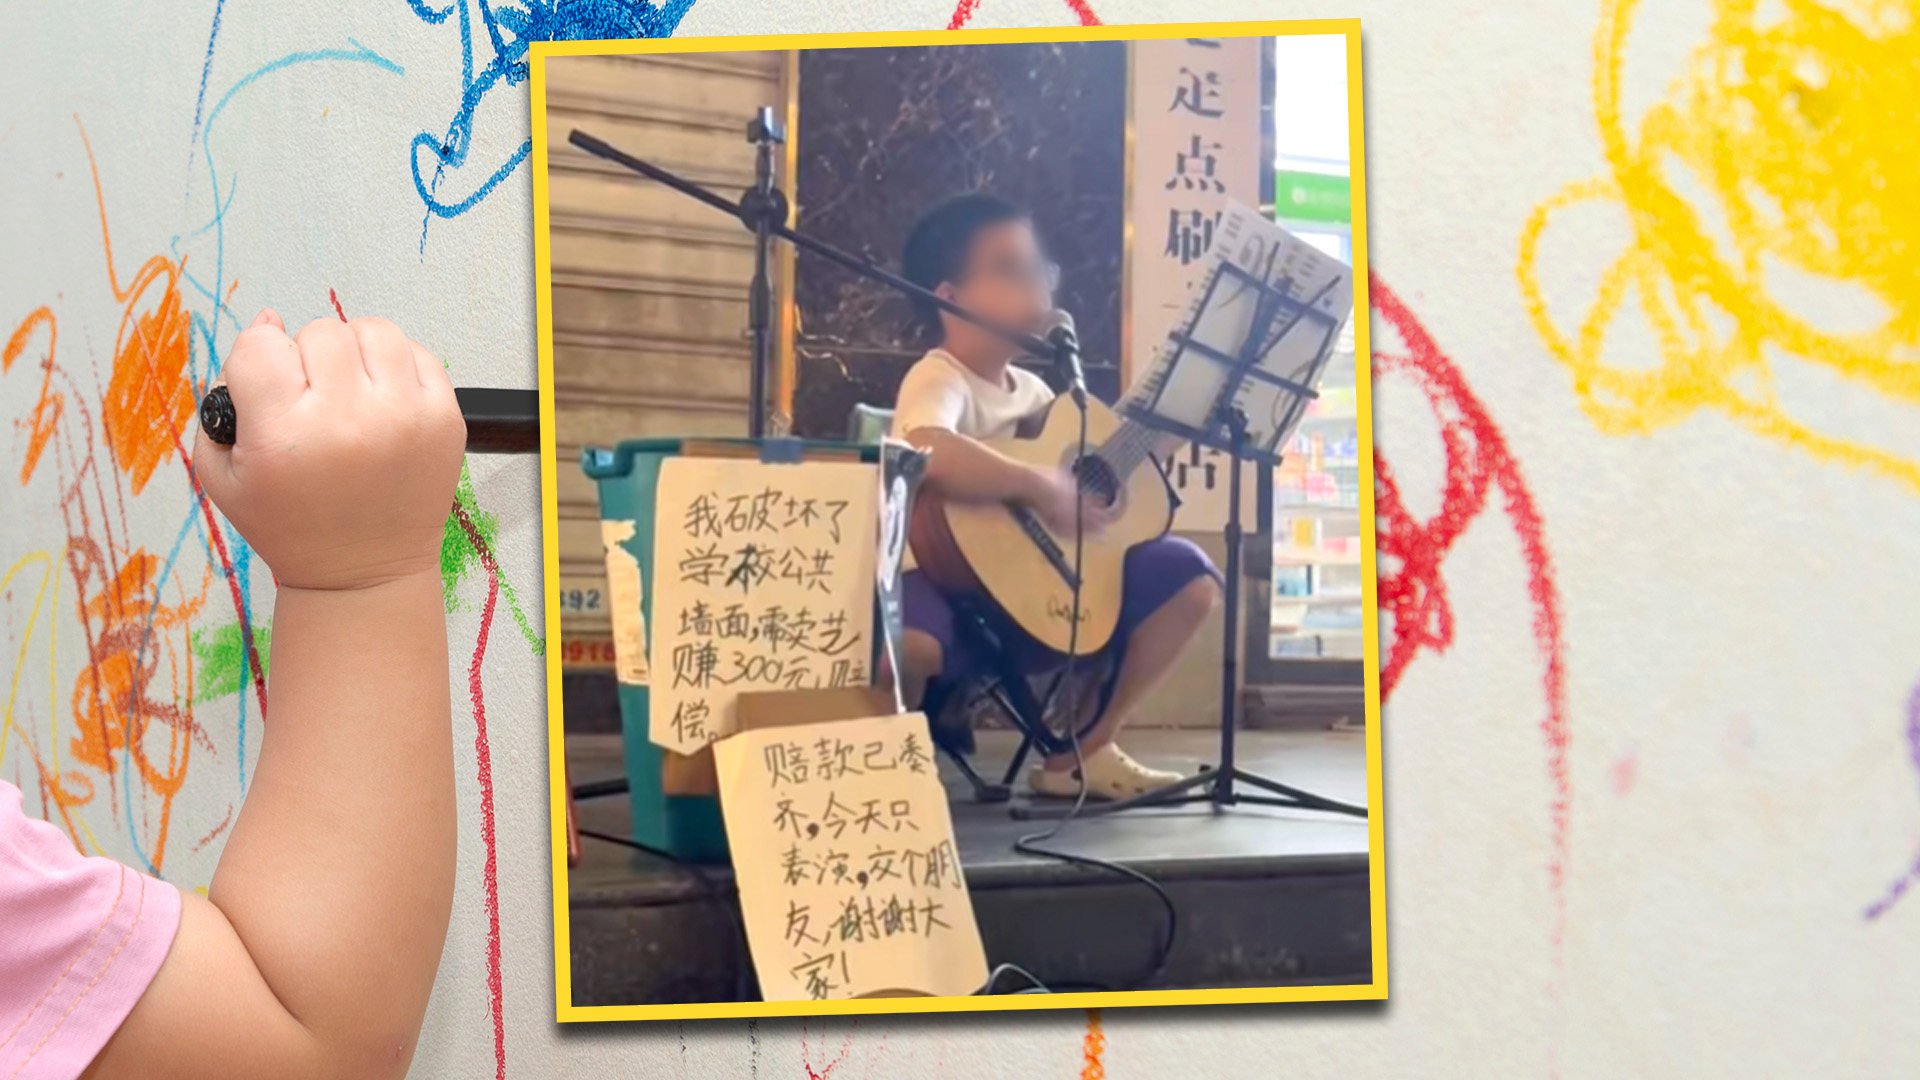 A mother and father in China have been praised online after they made their son, who daubed doodles on a school wall, busk in the street to raise cash to pay for the damage he caused. Photo: SCMP composite/Shutterstock/Douyin